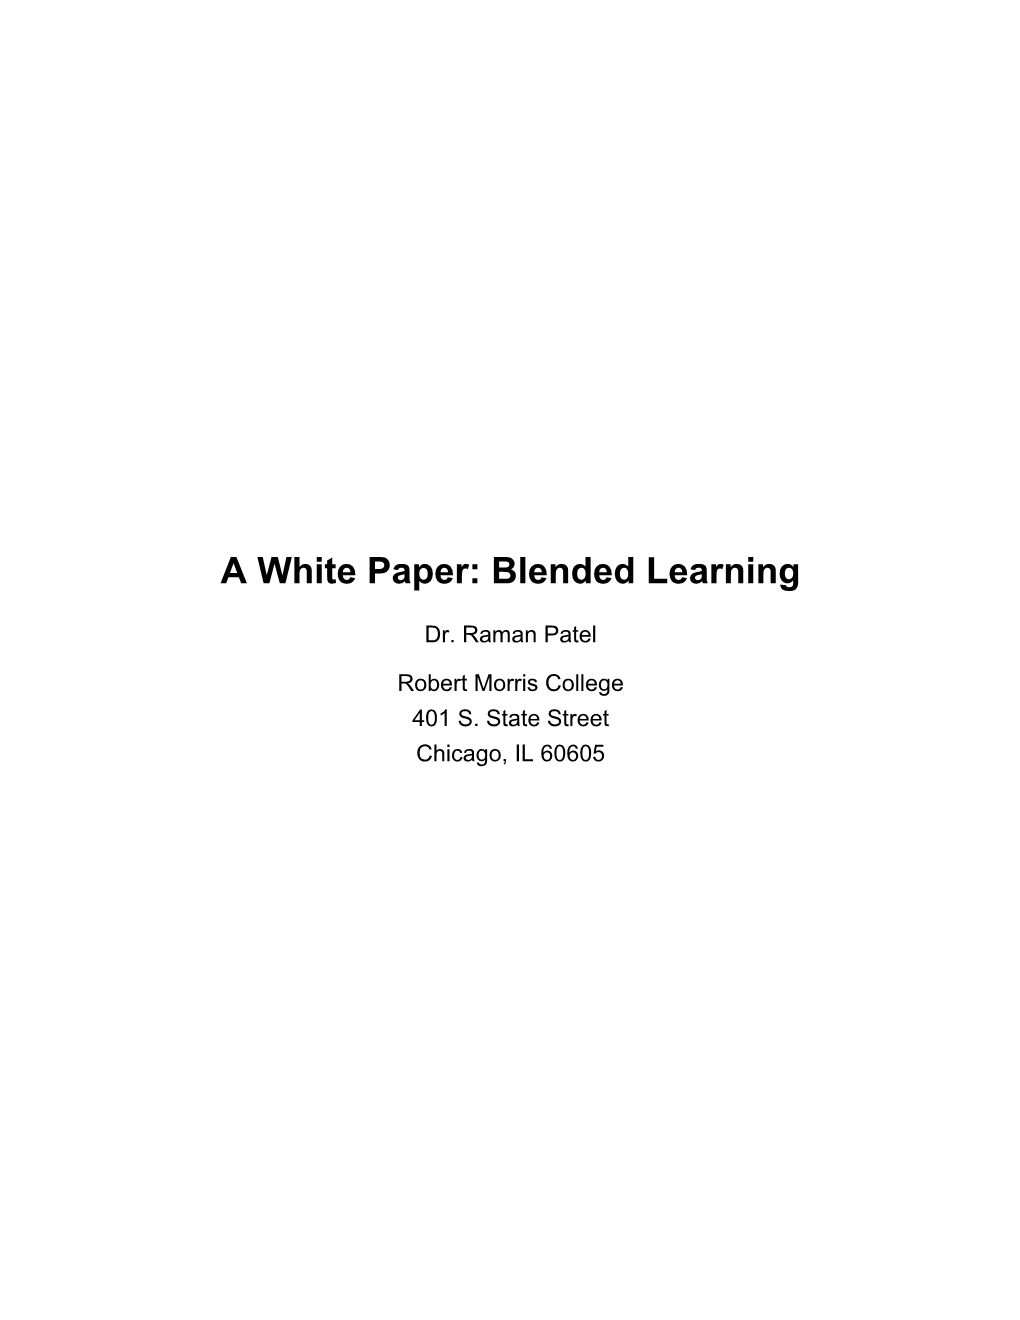 A White Paper: Blended Learning